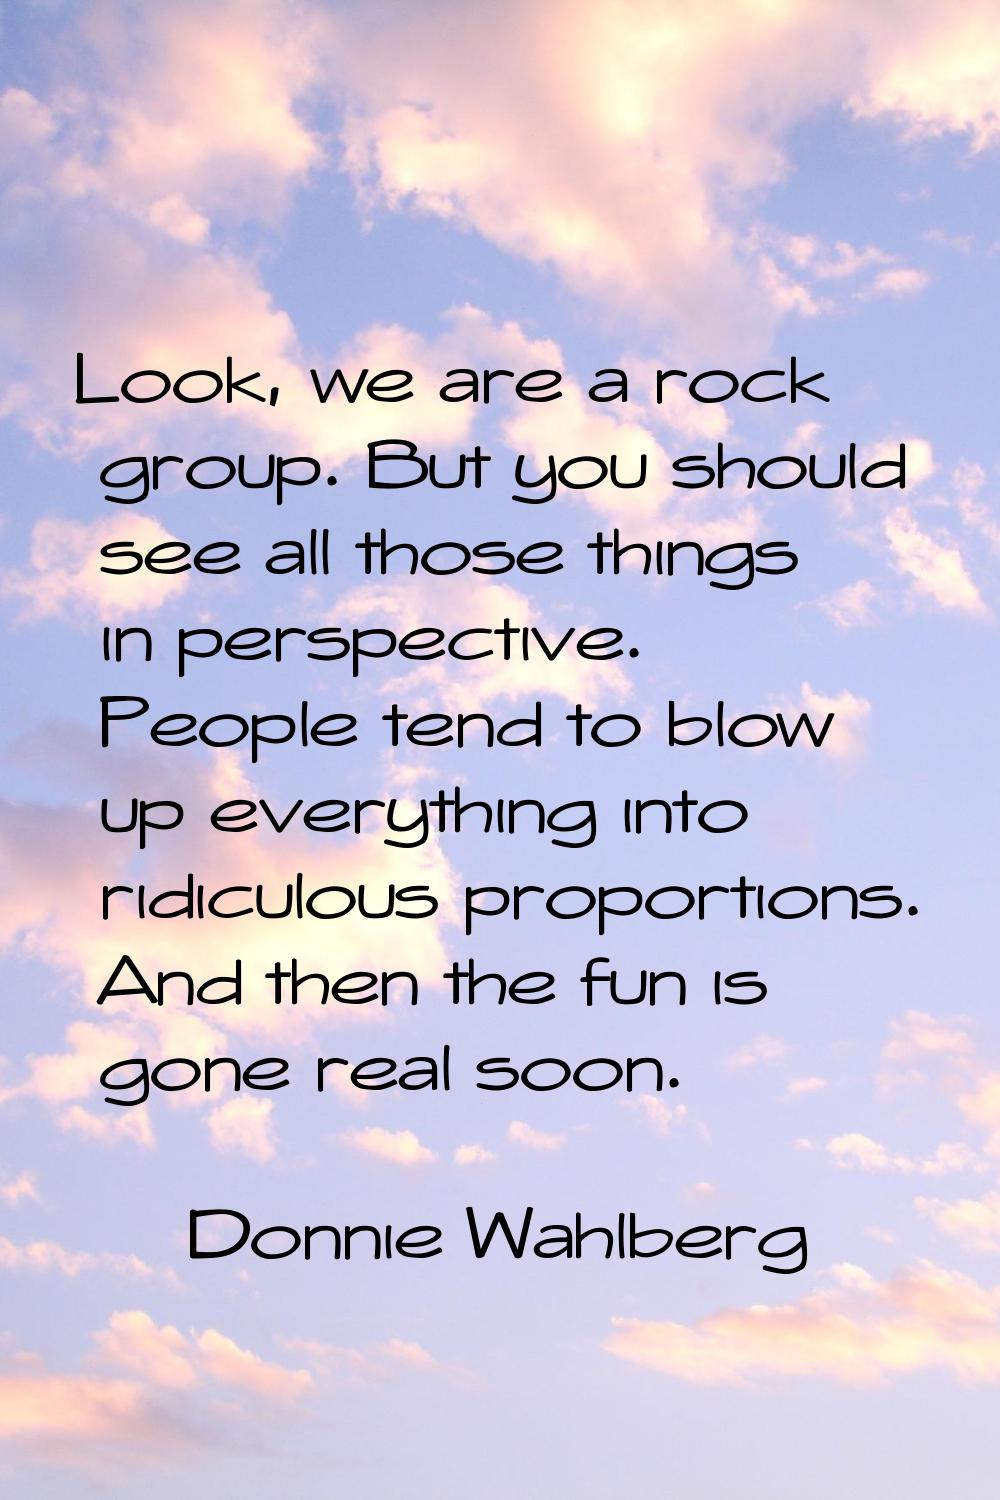 Look, we are a rock group. But you should see all those things in perspective. People tend to blow 